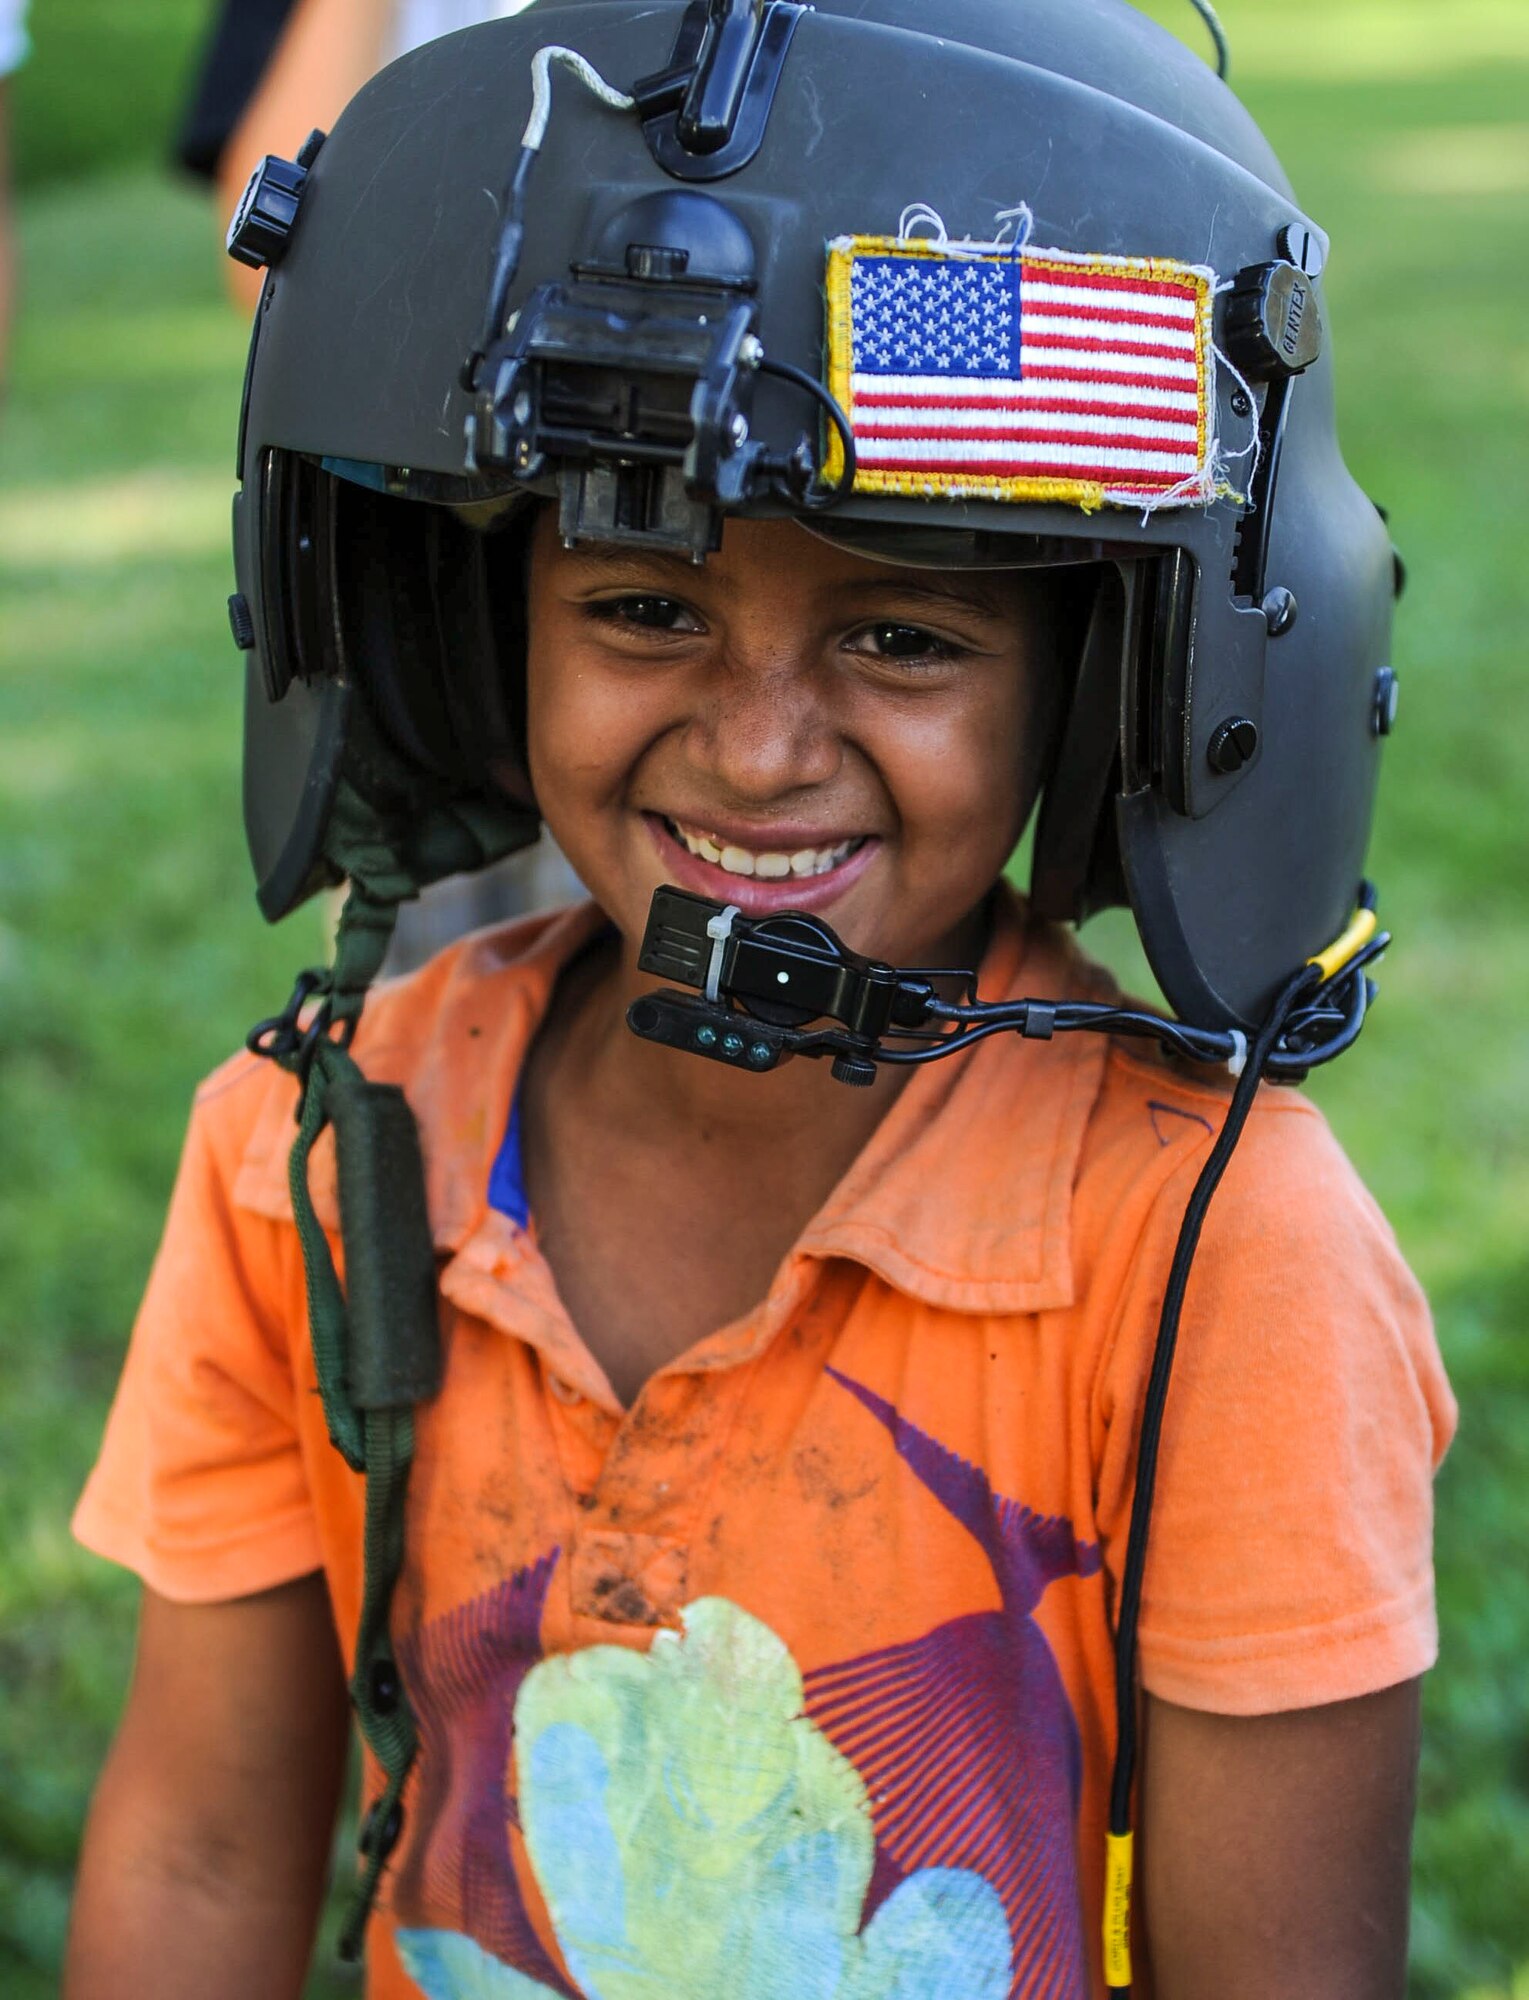 A young boy tries on an aviator helmet at Lake Yojoa, Honduras, Jan. 22, 2015.   The 1-228th Aviation Regiment partnered with U.S. Army Special Operations personnel to practice recovering live personnel. The over-water hoist training was held to ensure members of Joint Task Force-Bravo are planning and preparing for crisis and contingency response, as well as countering transnational organized crime, and counterterrorism operations as part of U.S. Southern Command’s mission. Contingency planning prepares the command for various scenarios that pose the greatest probability of challenging our regional partners or threatening our national interests. (U.S. Air Force photo/Tech. Sgt. Keola Soon)